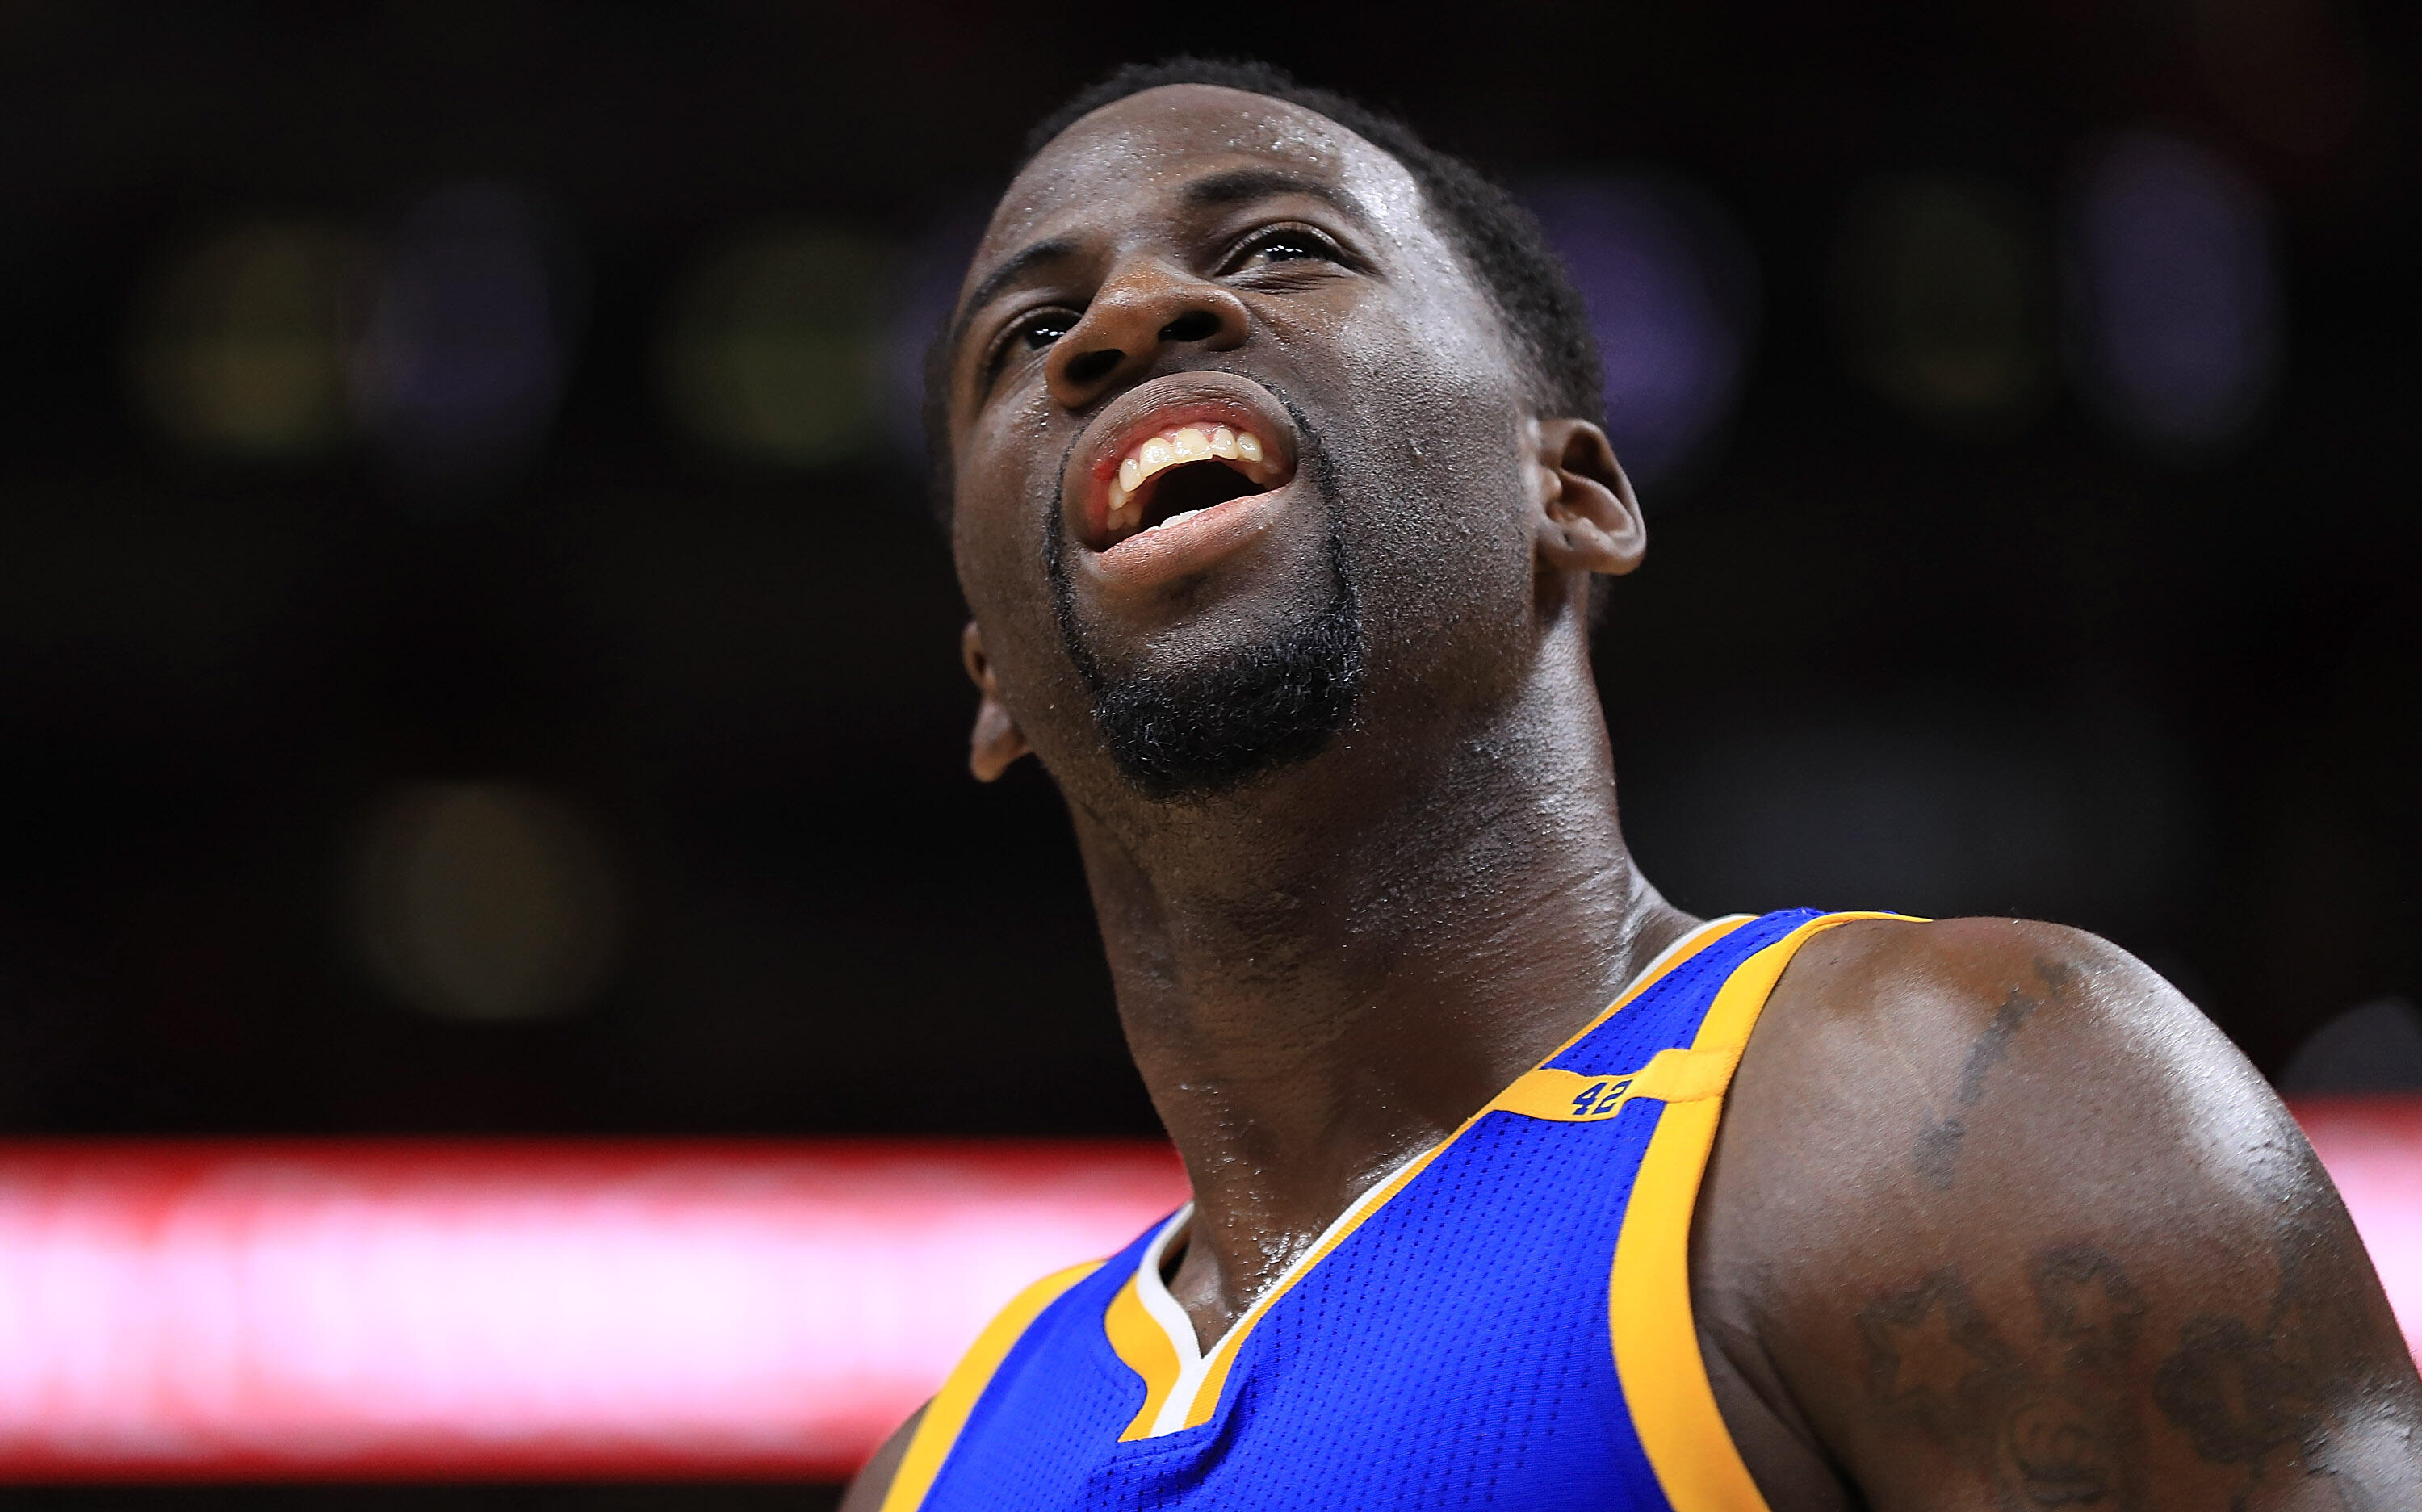 MIAMI, FL - JANUARY 23:  Draymond Green #23 of the Golden State Warriors looks on during a game against the Miami Heat at American Airlines Arena on January 23, 2017 in Miami, Florida. NOTE TO USER: User expressly acknowledges and agrees that, by download